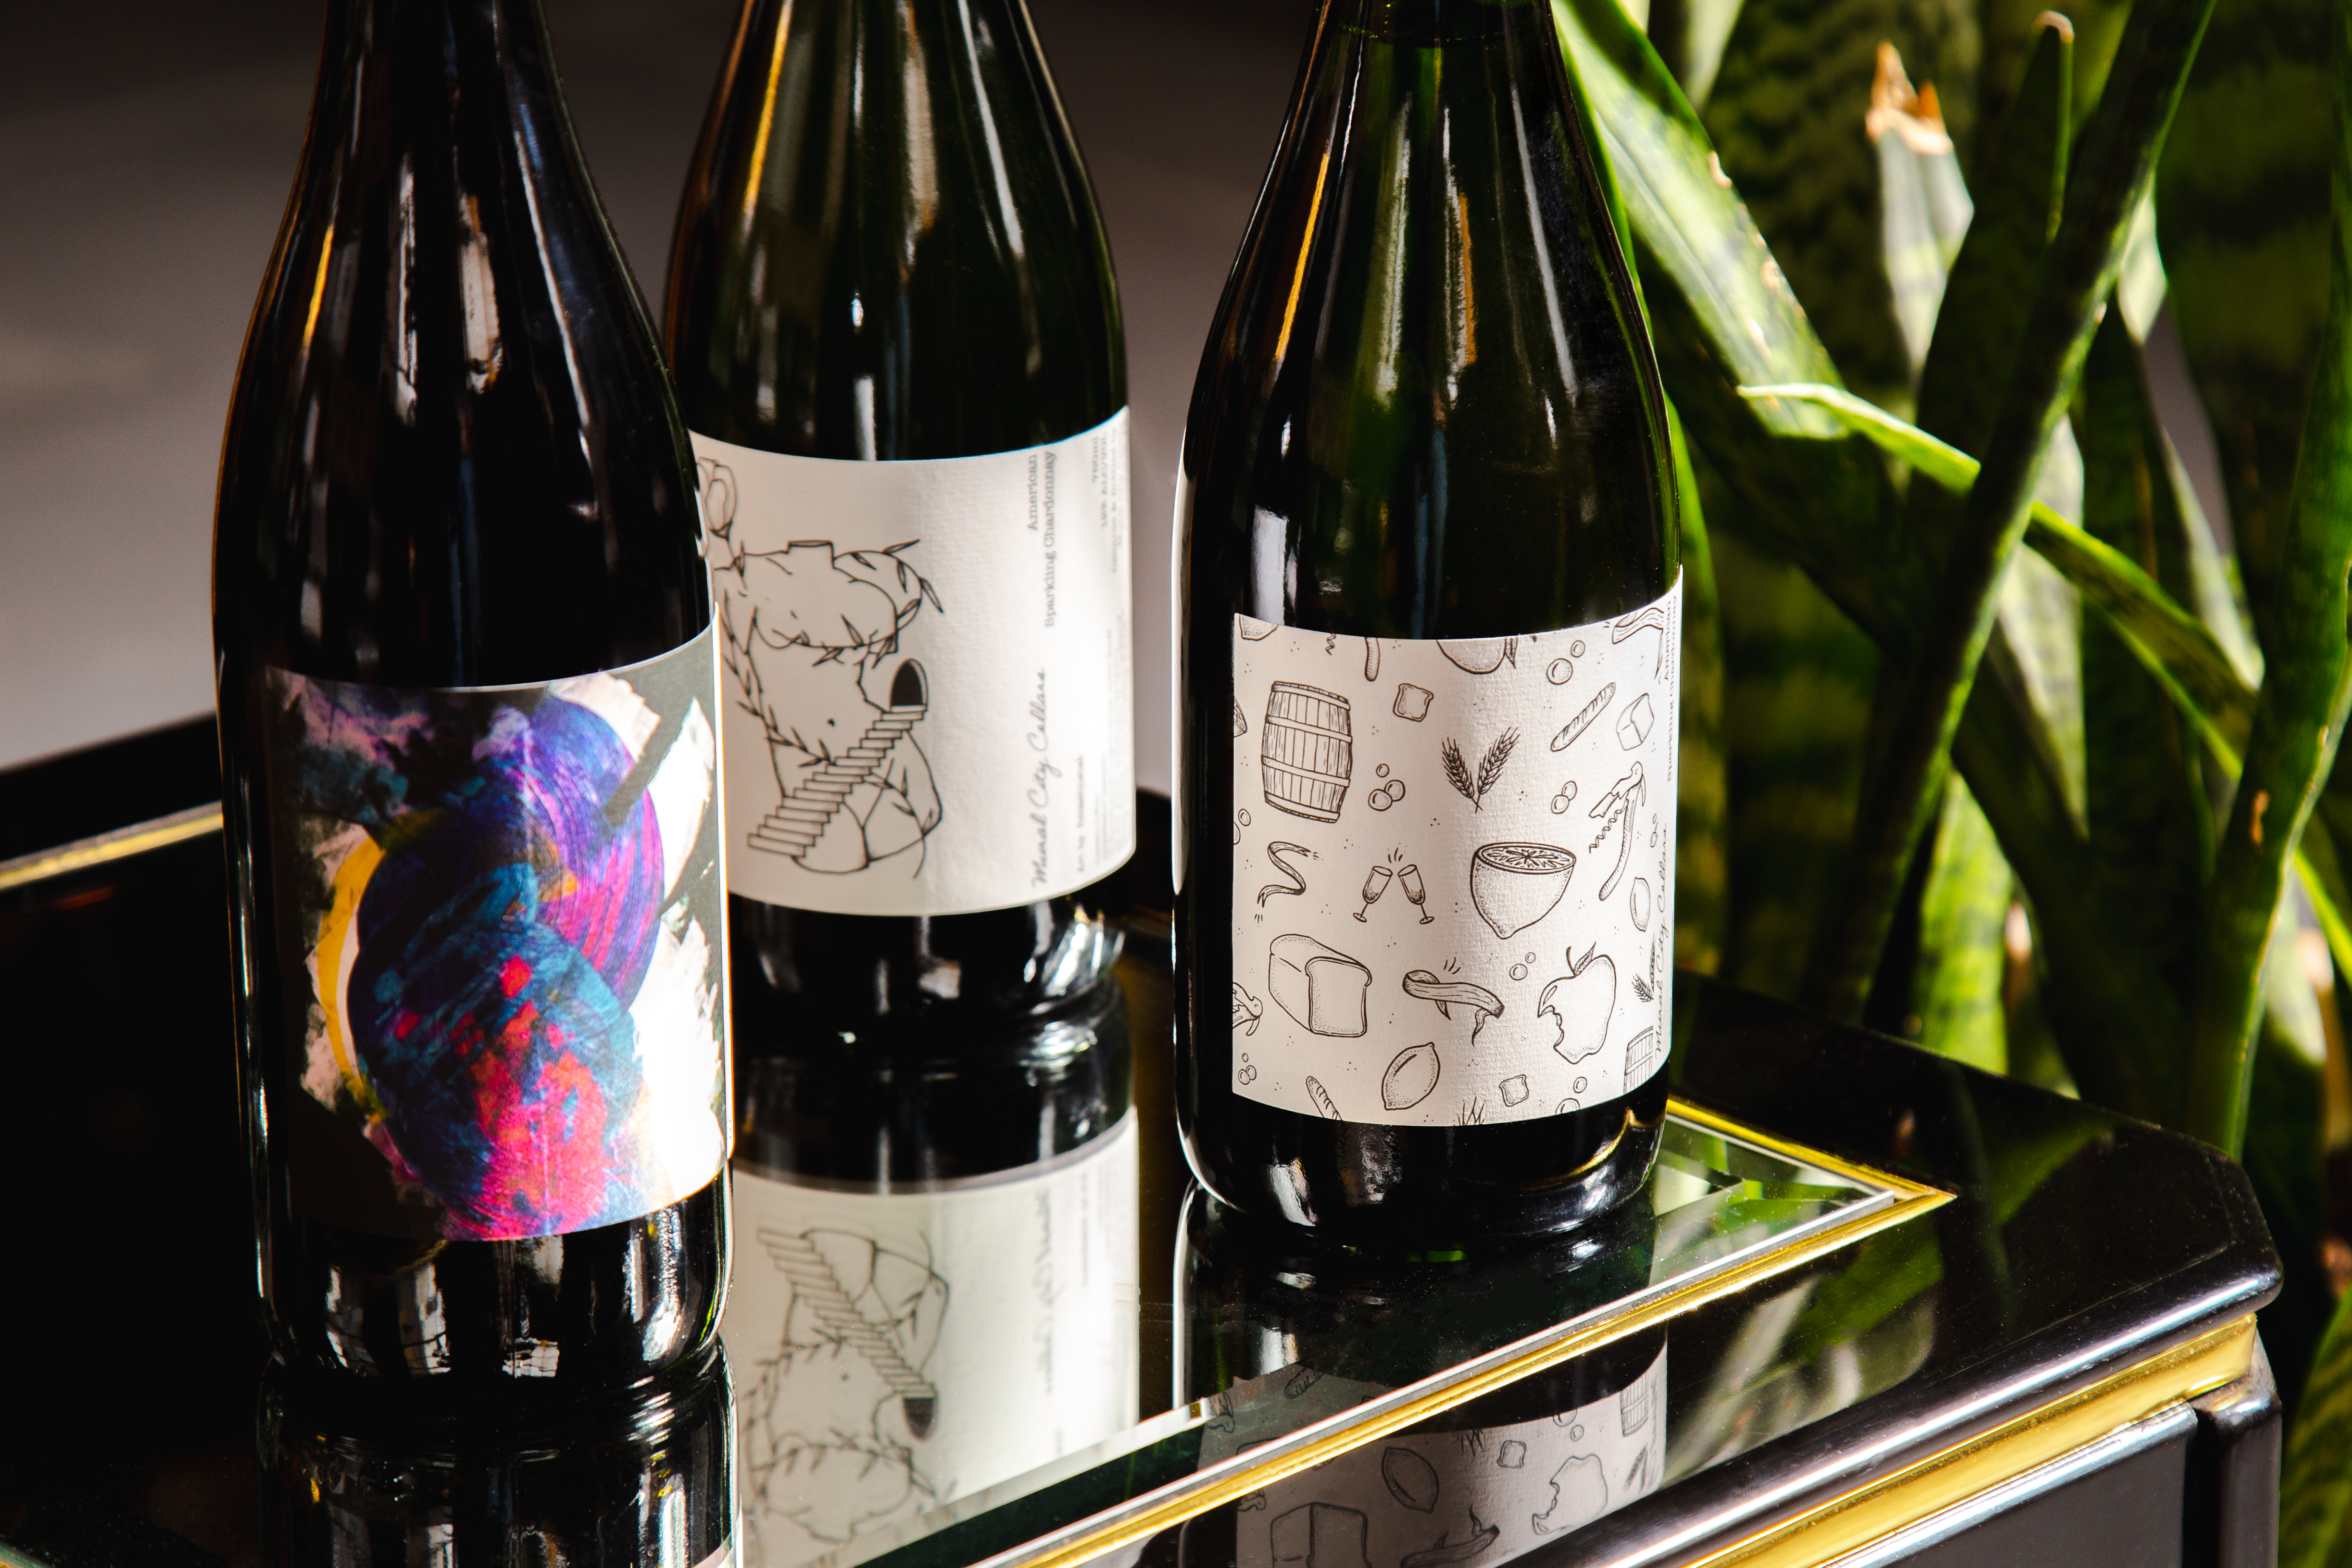 three bottles of wine with illustrations and visual art on the bottles